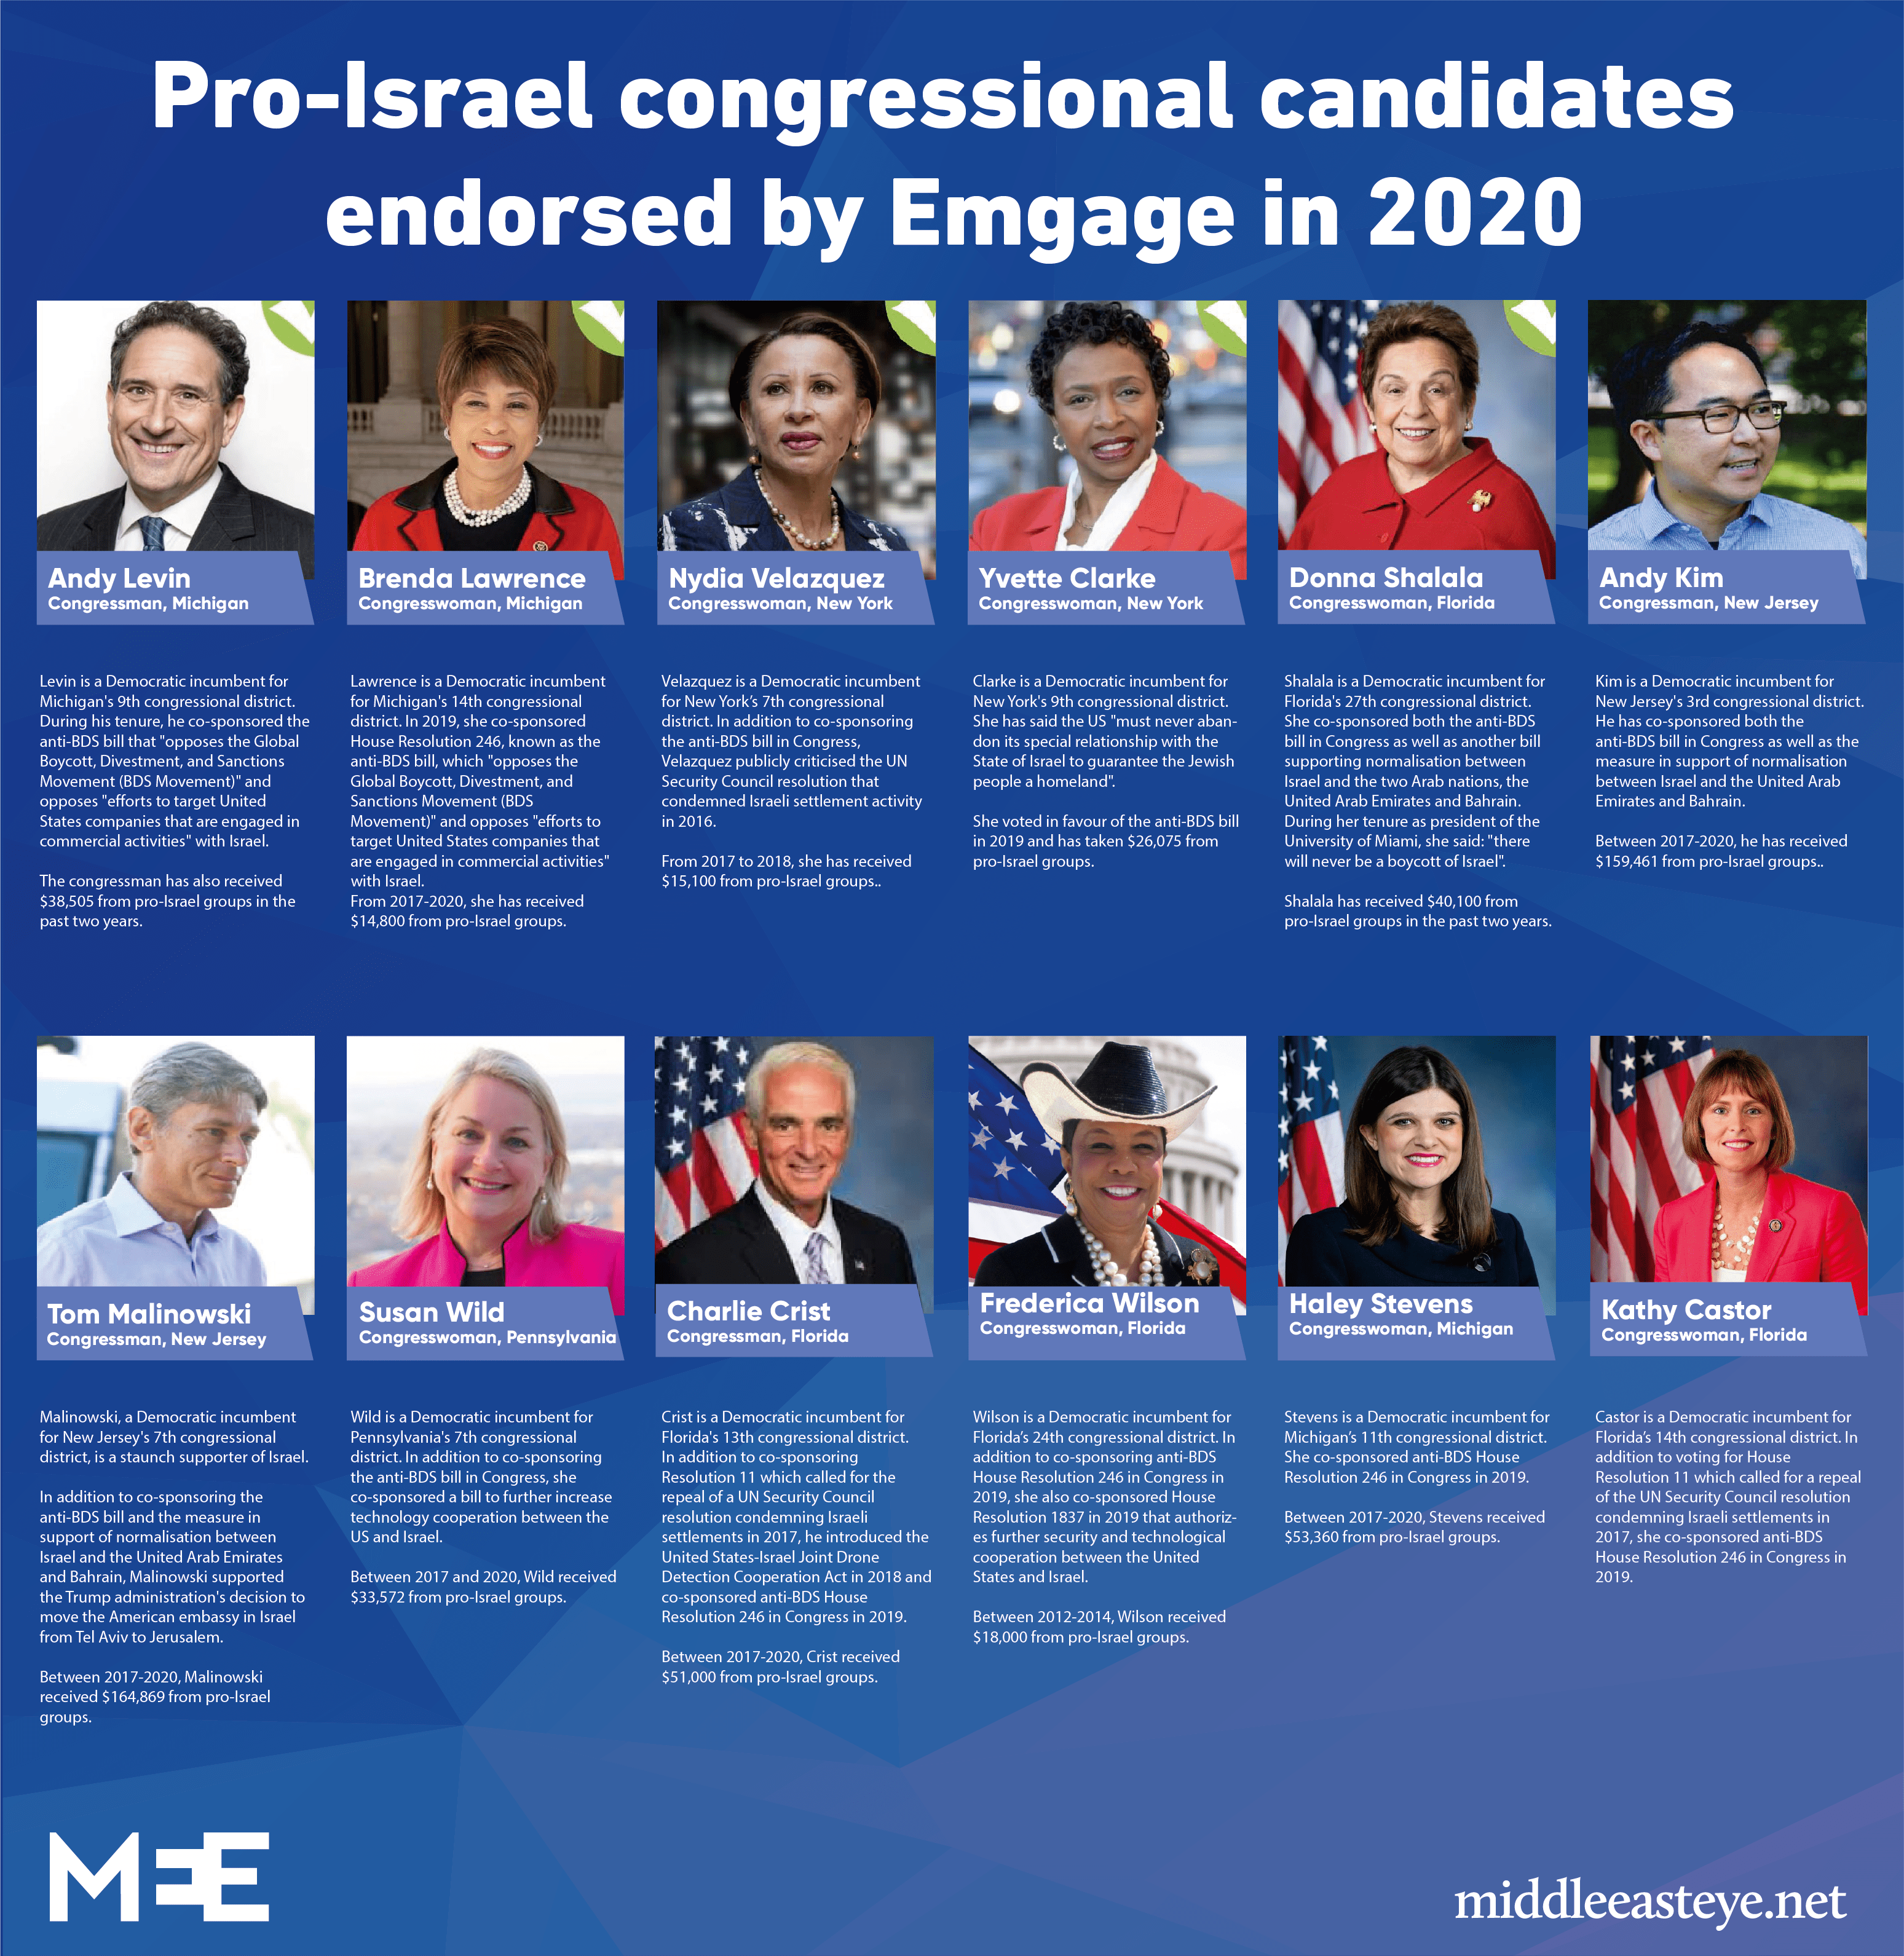 Pro-Israel candidates supported by Emgage